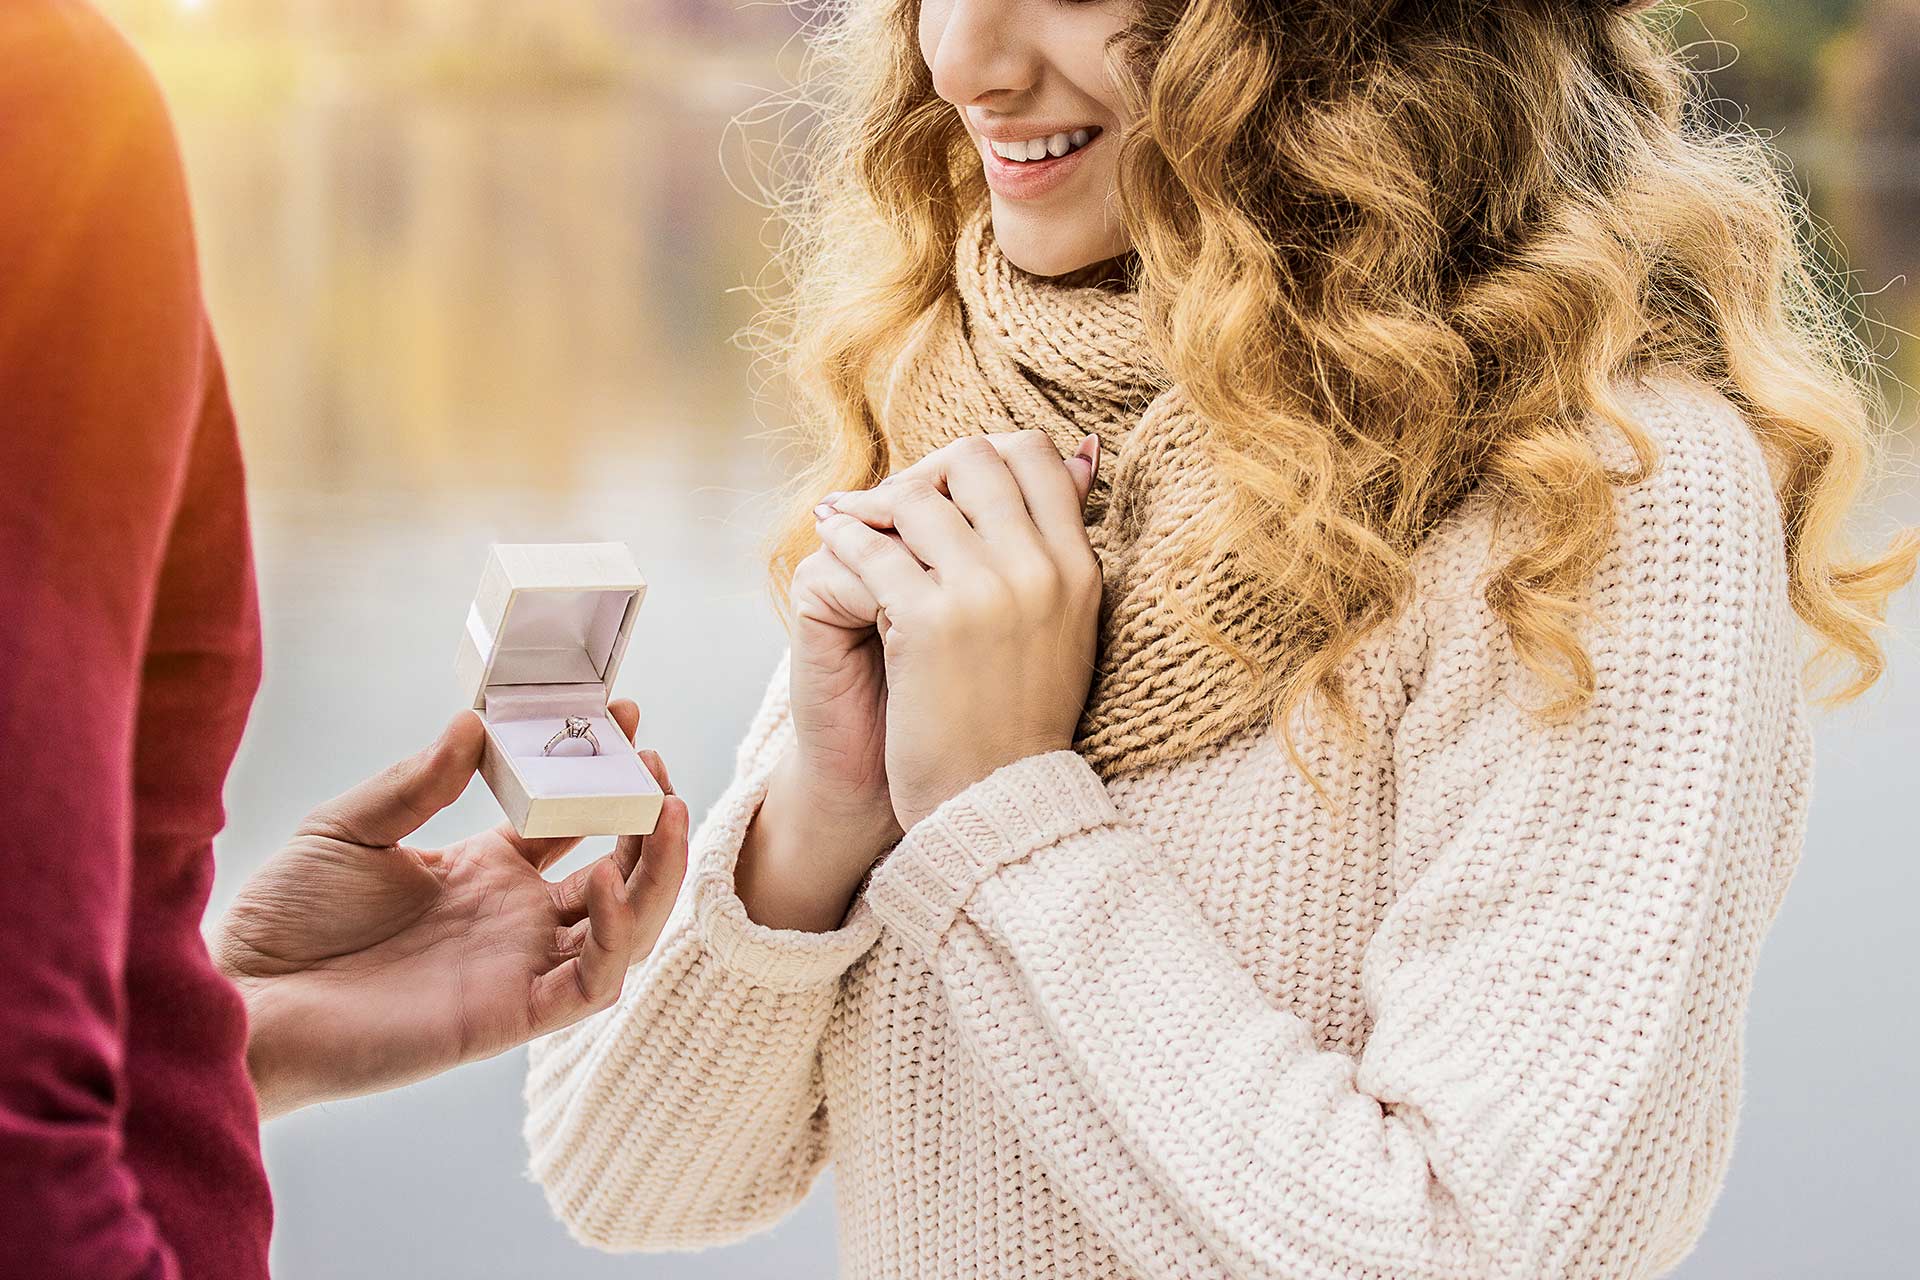 From Carats to Cuts: A Step-by-Step Guide to Selecting Your Dream Engagement Ring